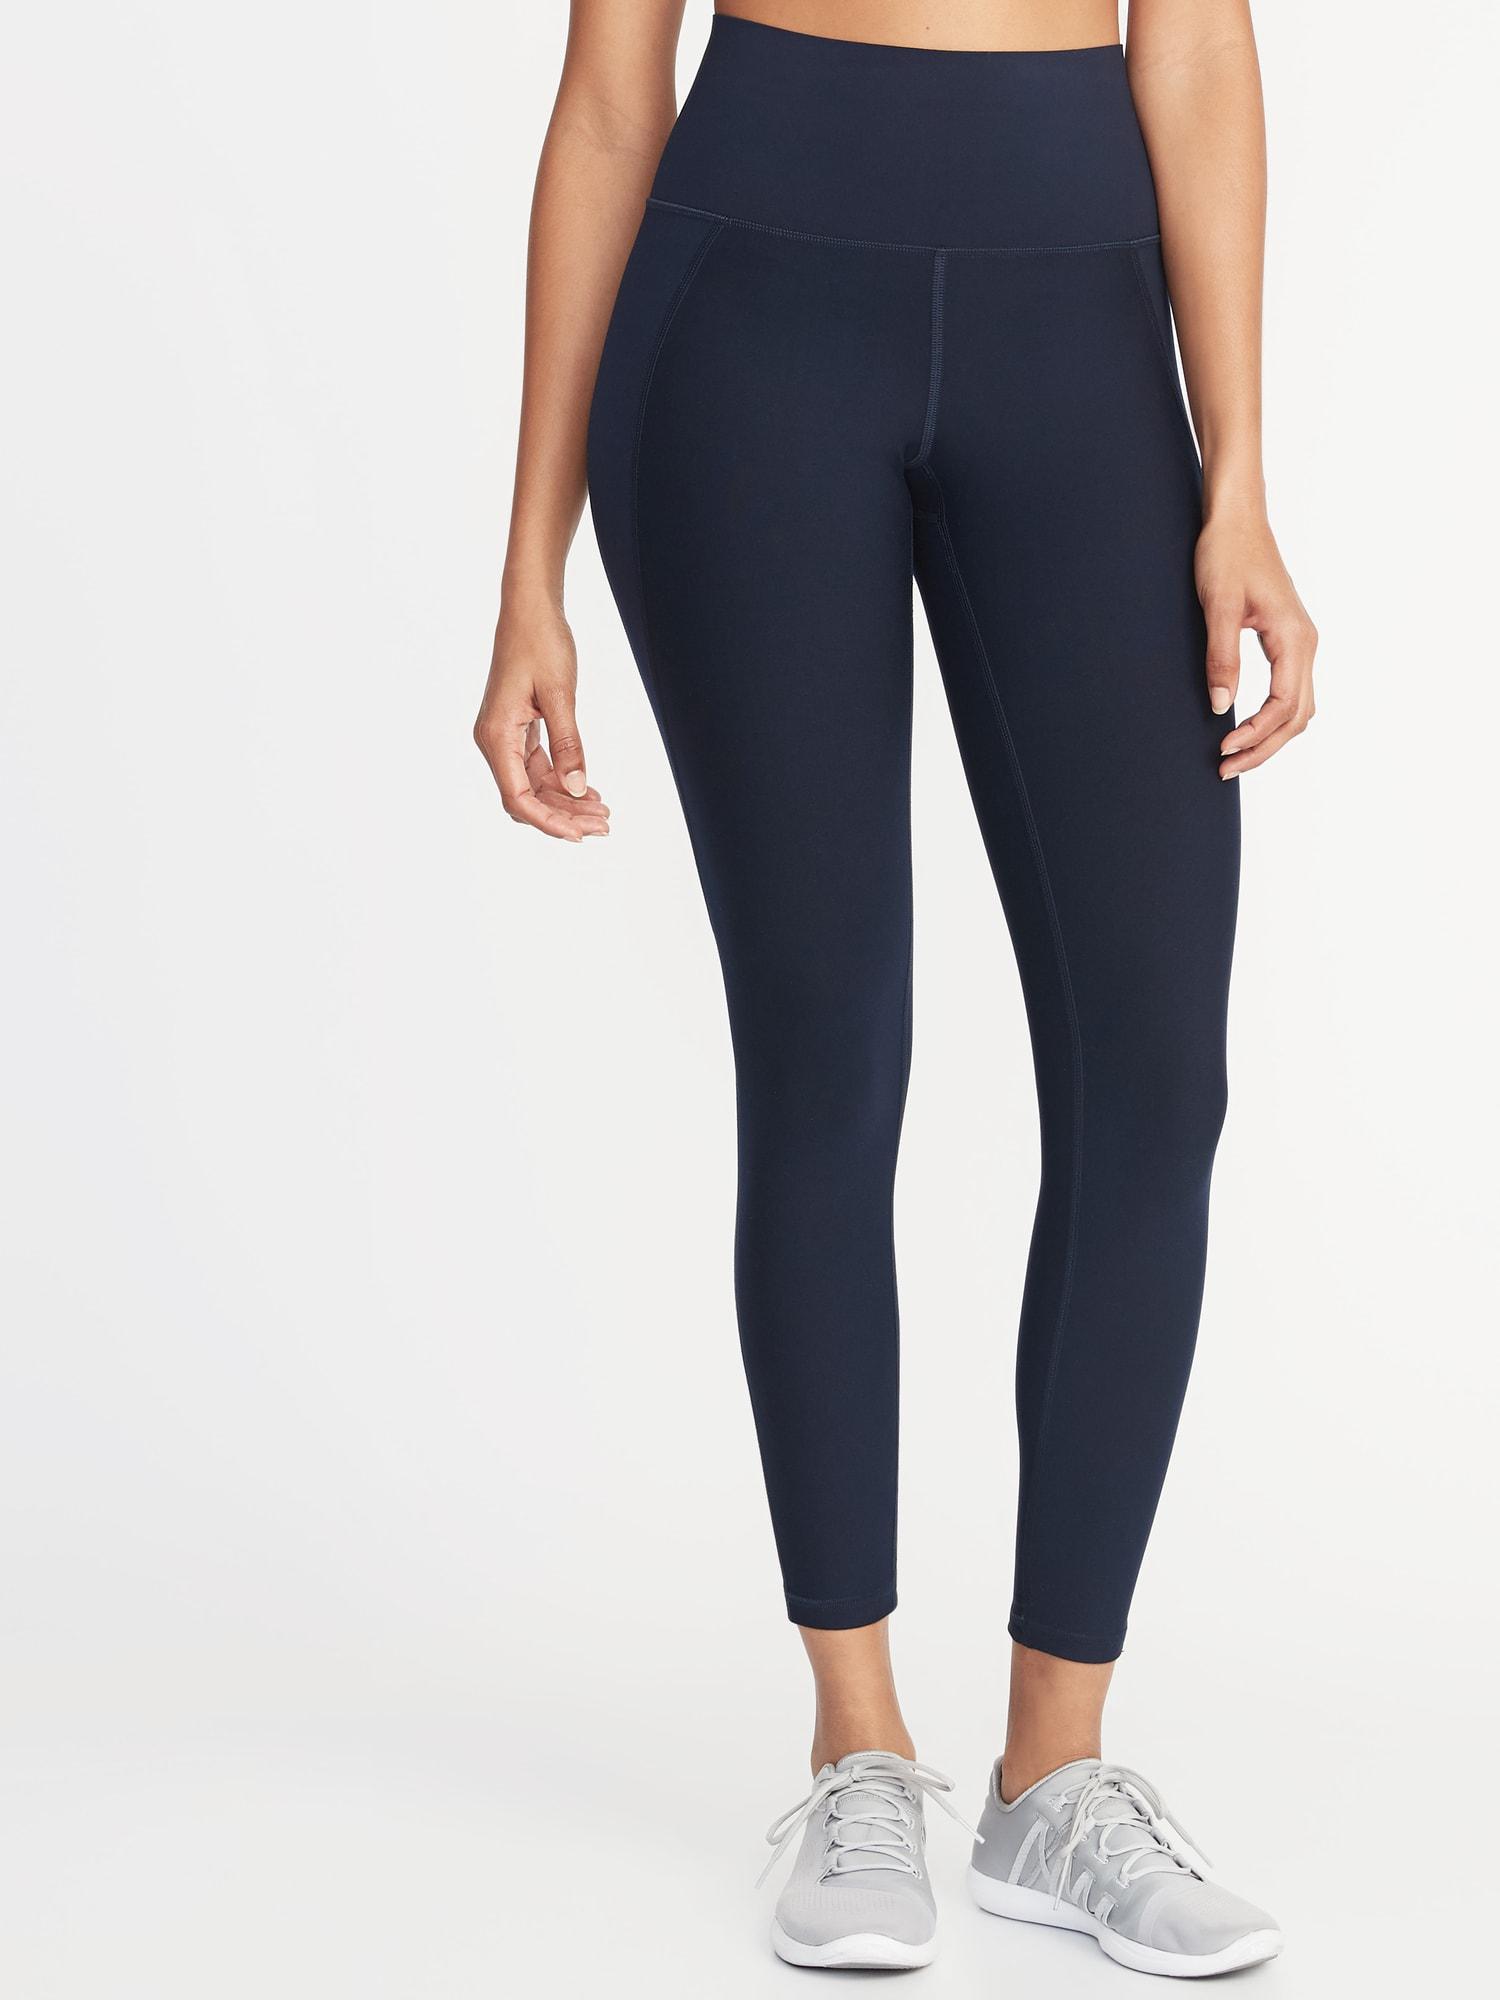 Old Navy Compression Leggings Reviewsnap  International Society of  Precision Agriculture